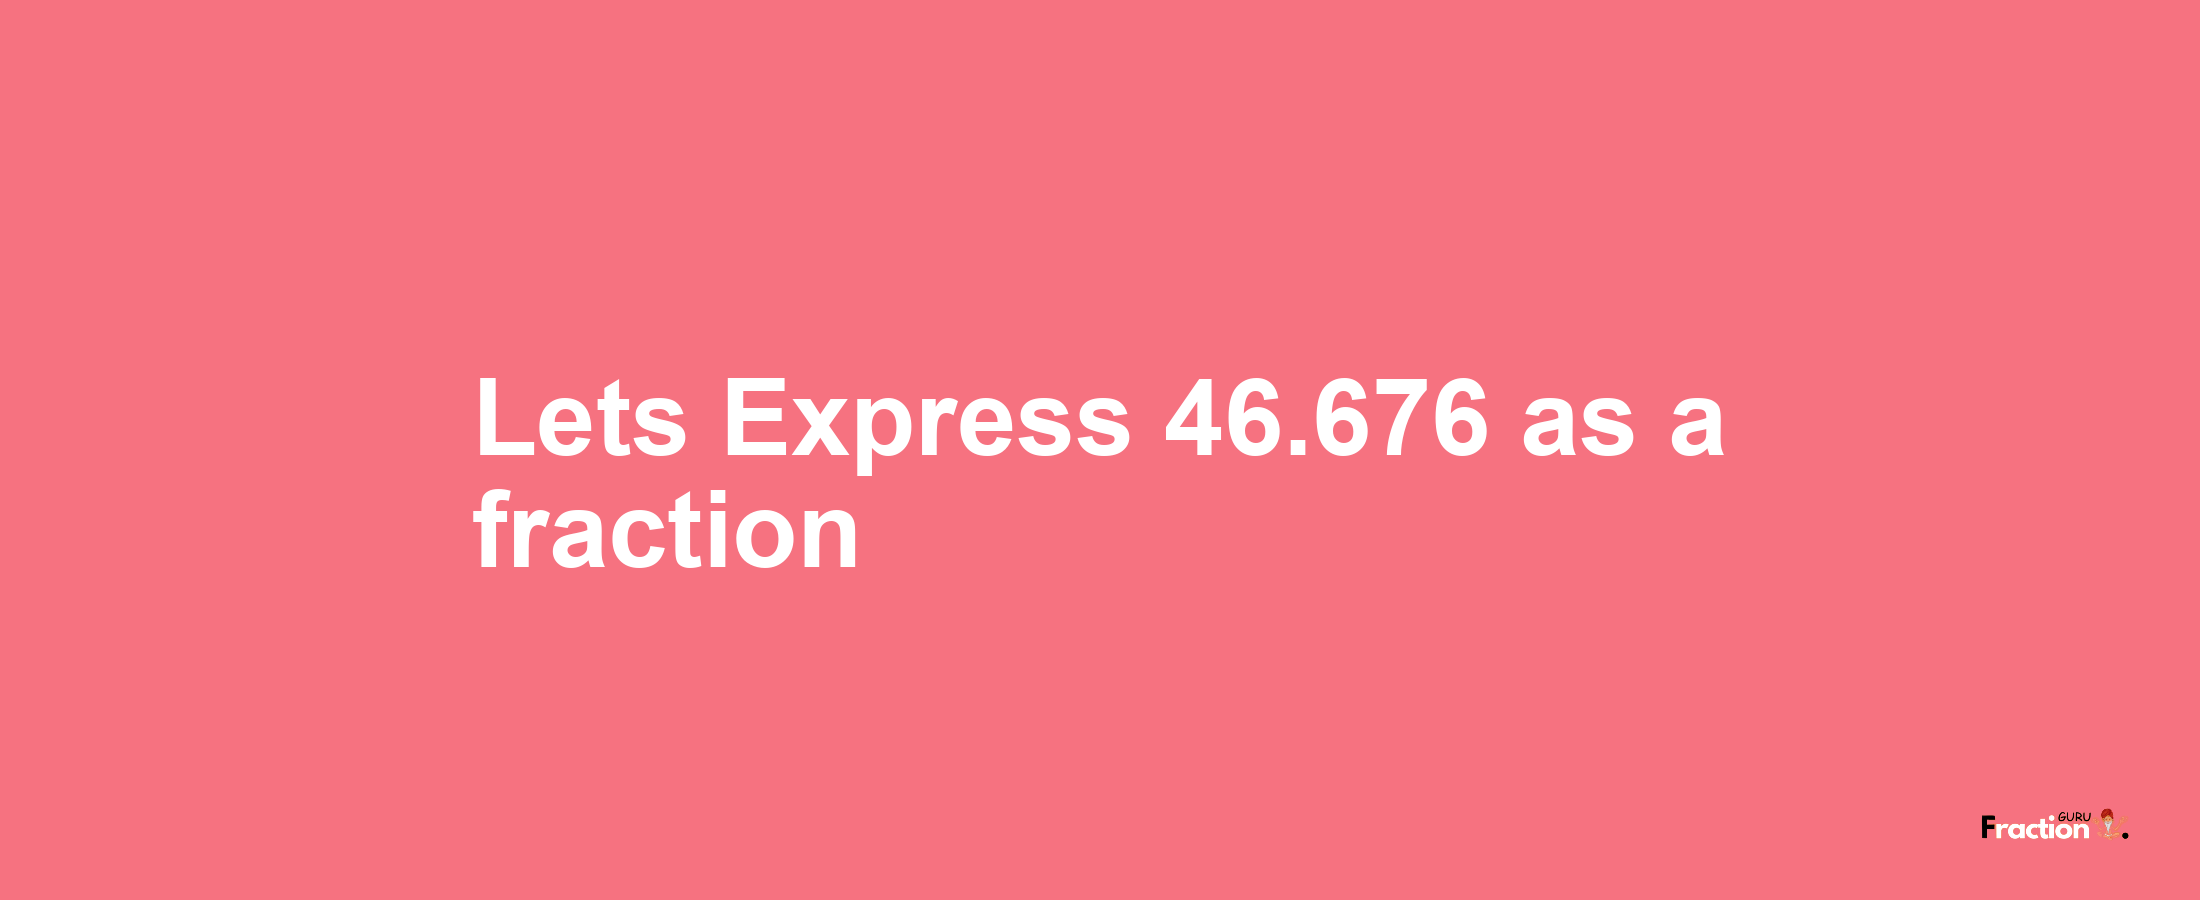 Lets Express 46.676 as afraction